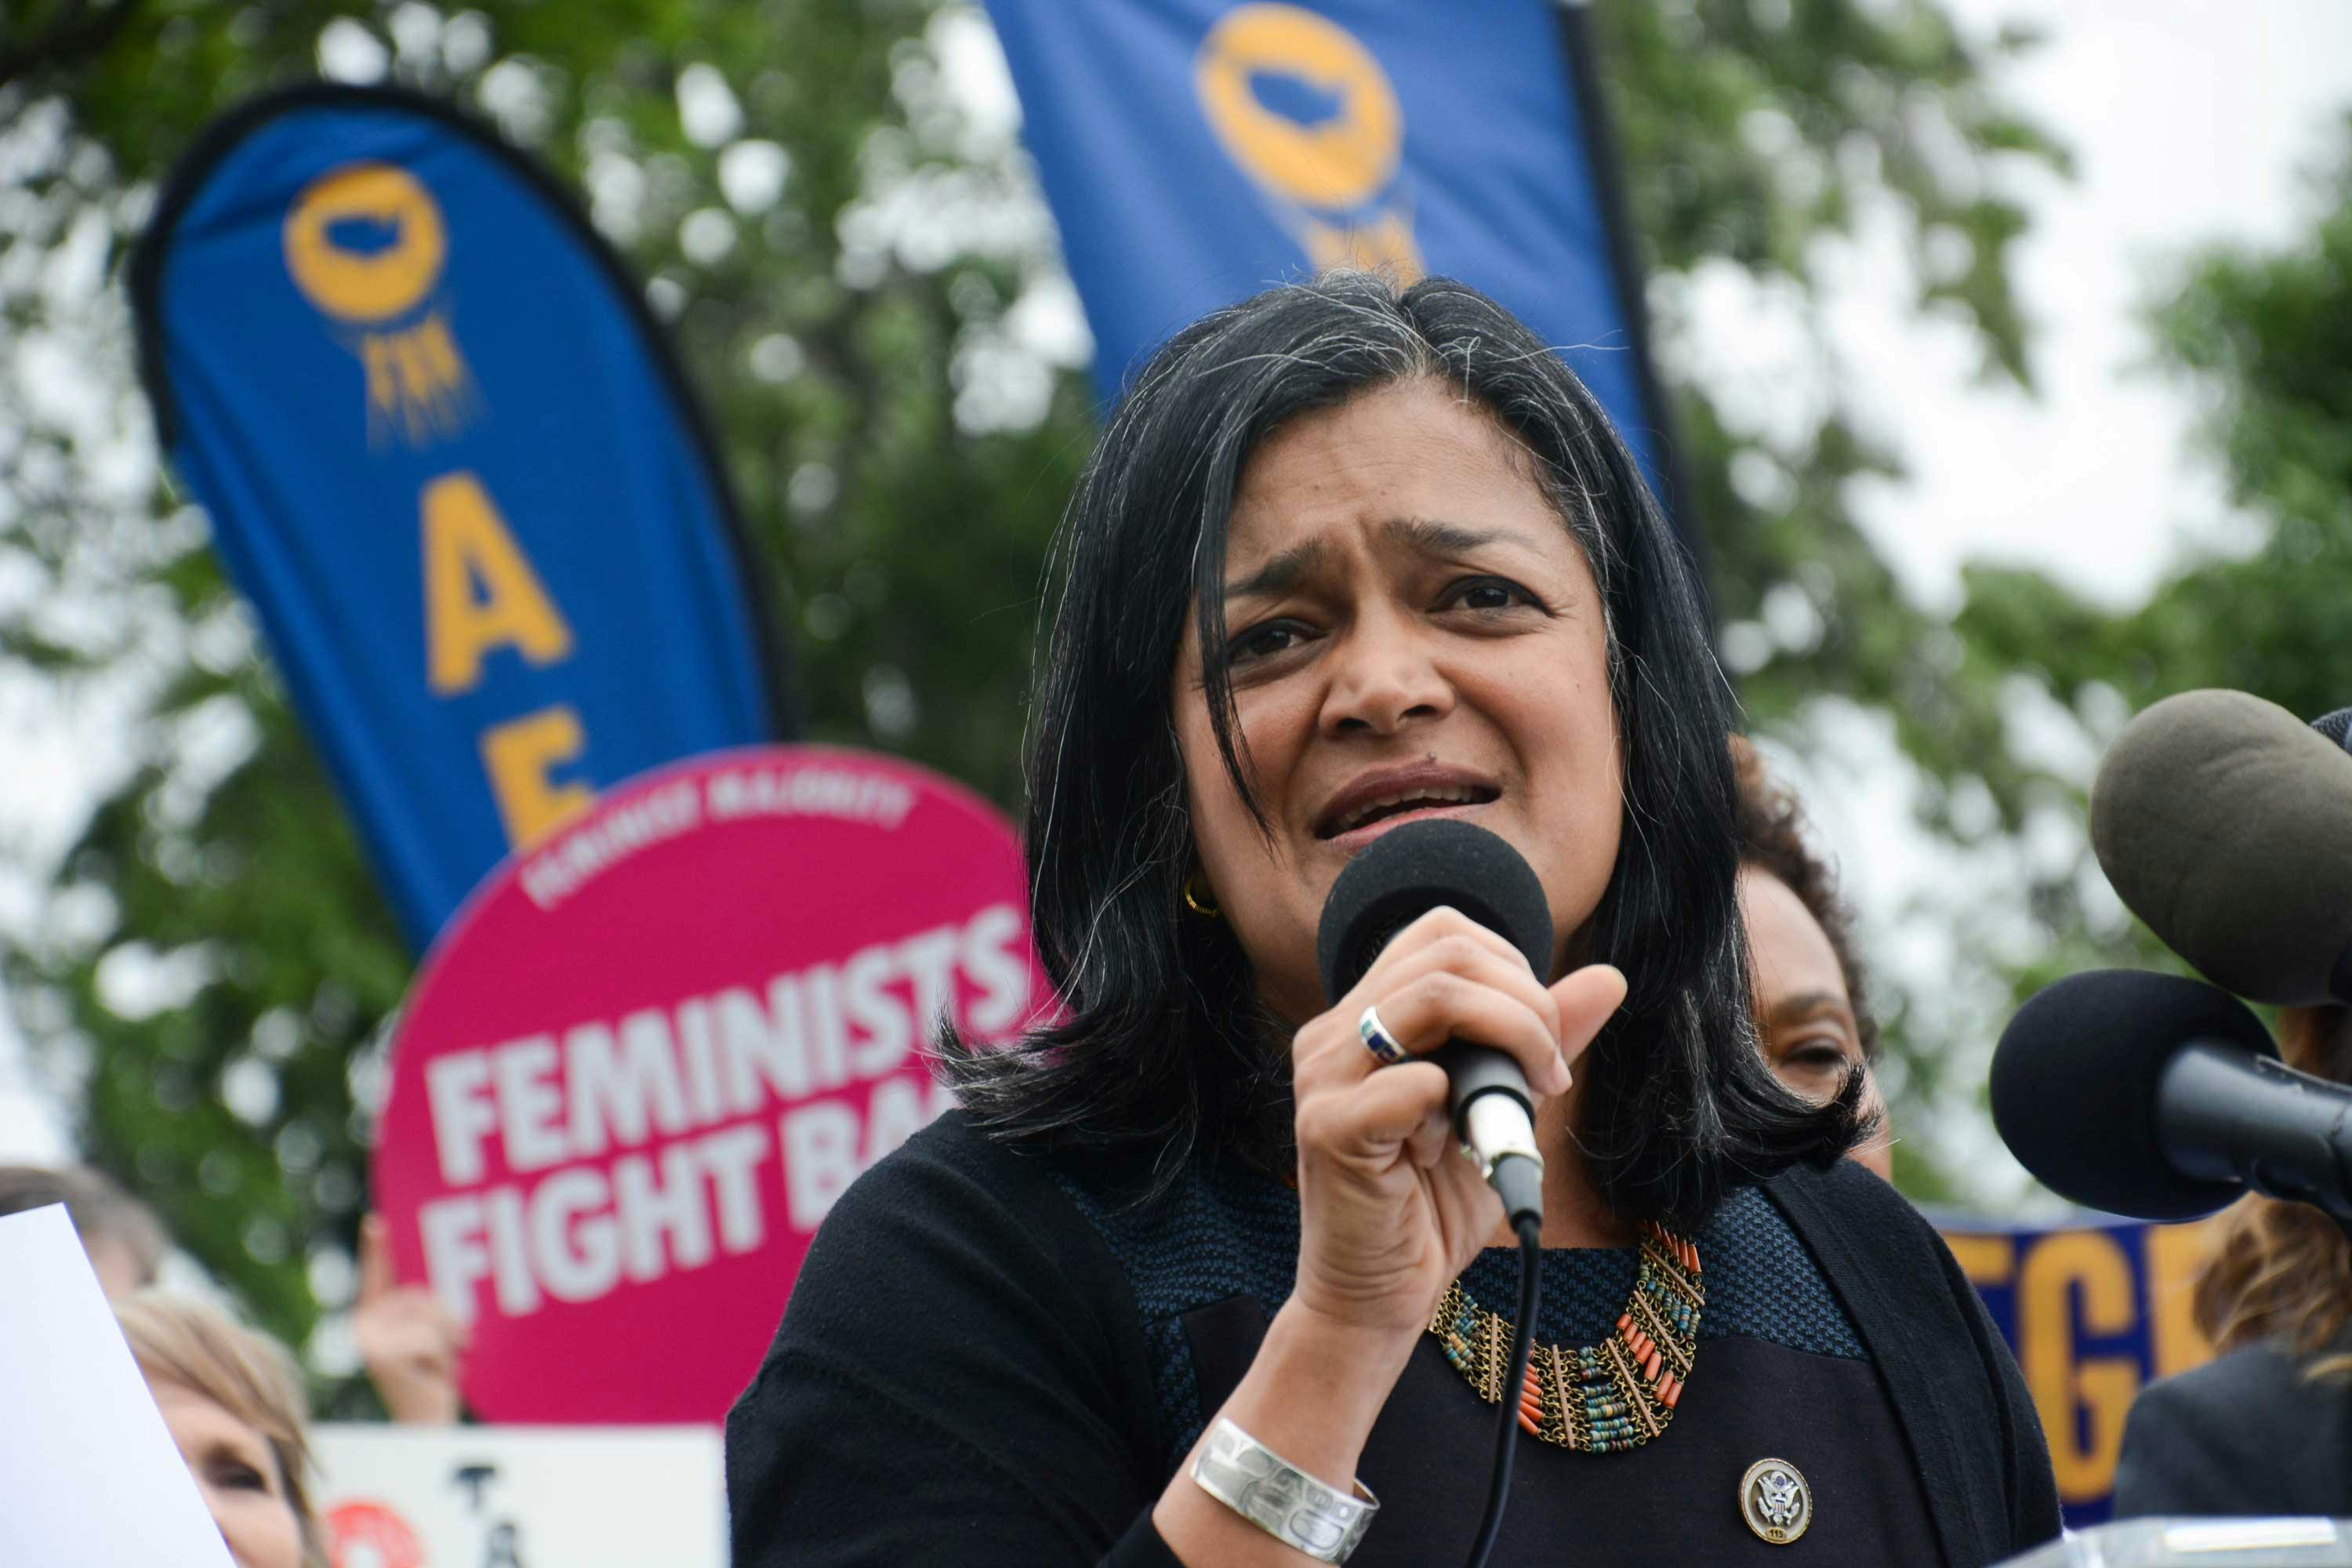 Lawmakers, community organizations, and unions — including Pramila Jayapal — gathered in 2017 on the grounds of the U.S. Capitol to voice concerns about the Trump administration’s budget. (AFGE)